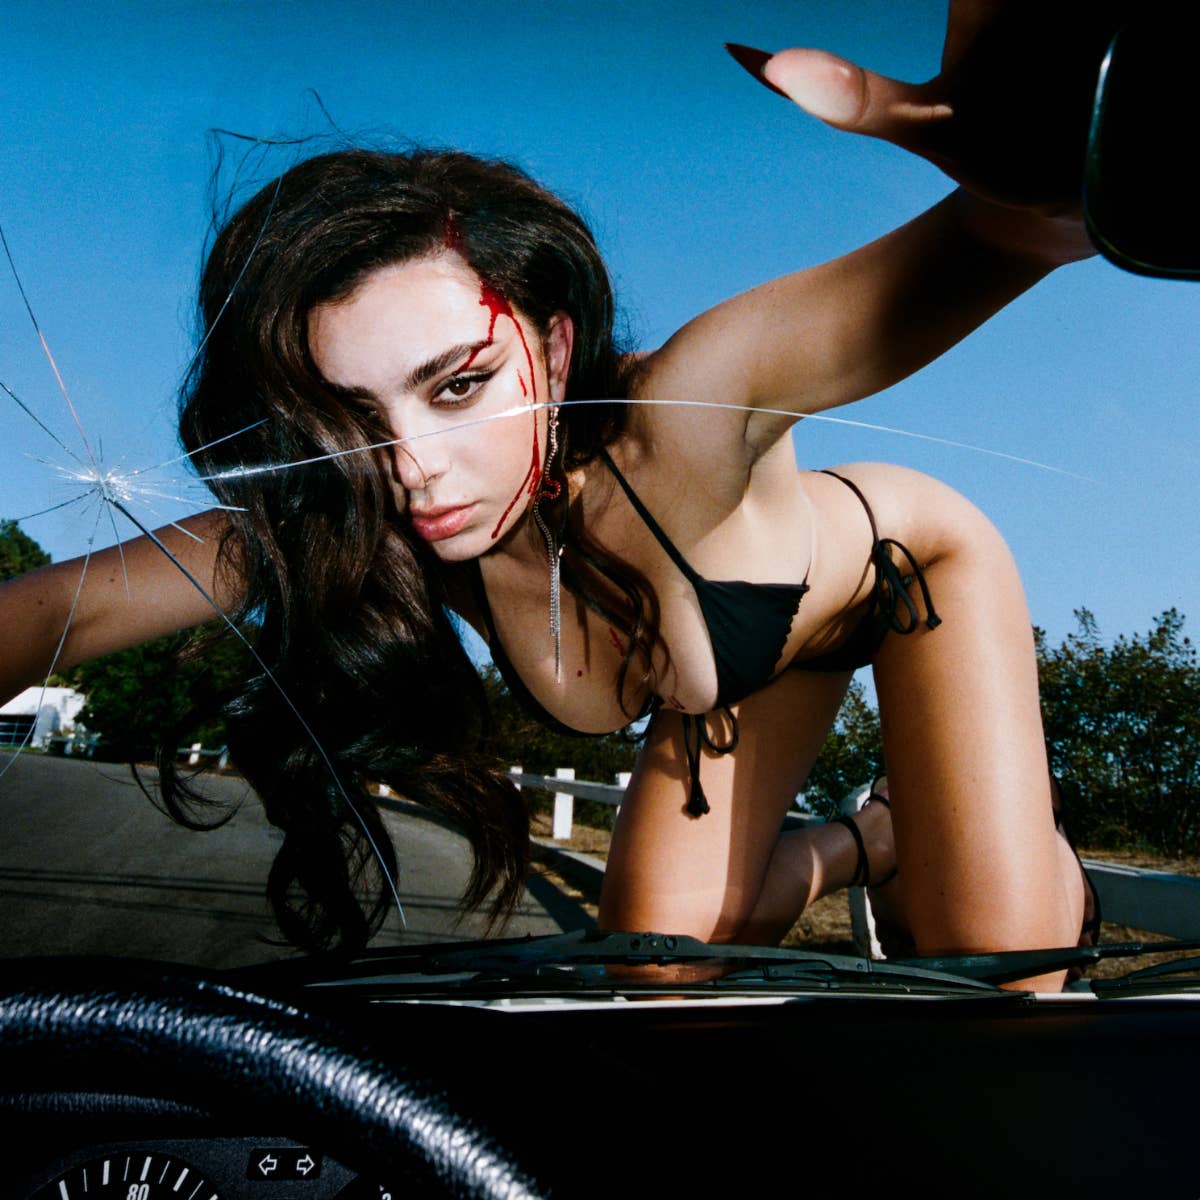 Charli XCX is seen on the hood of a car